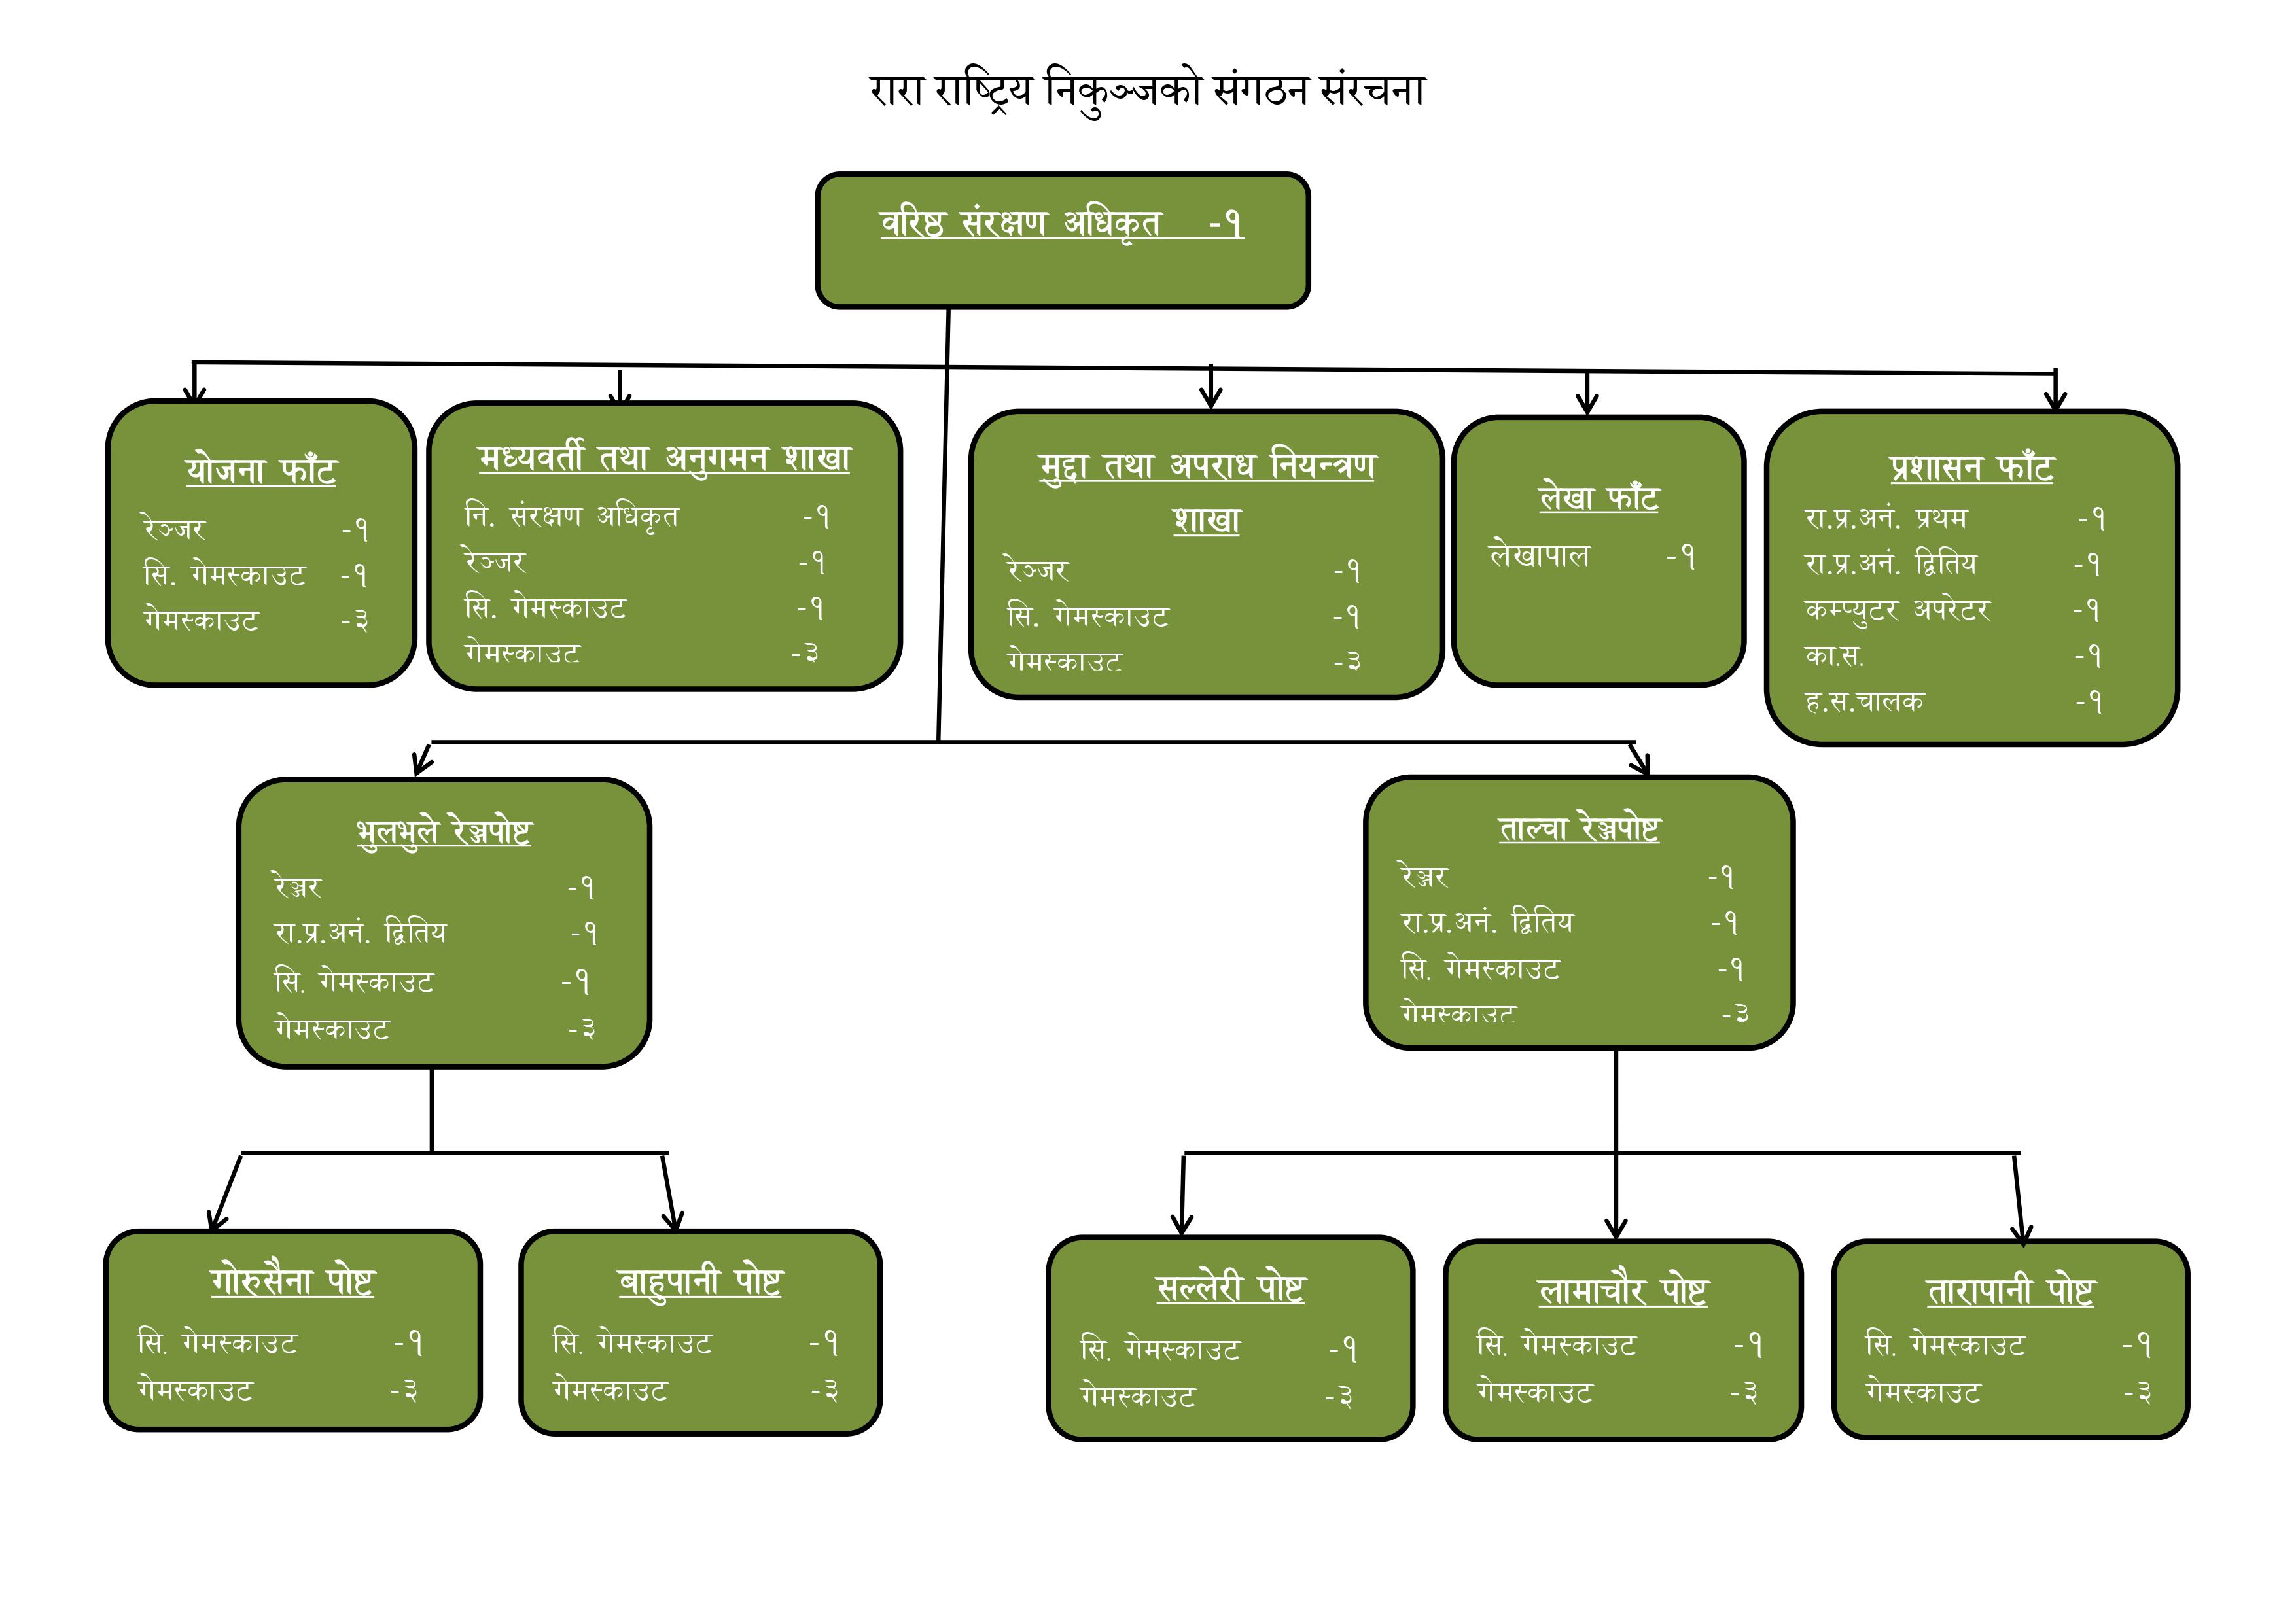 organization structure of RNP Nep